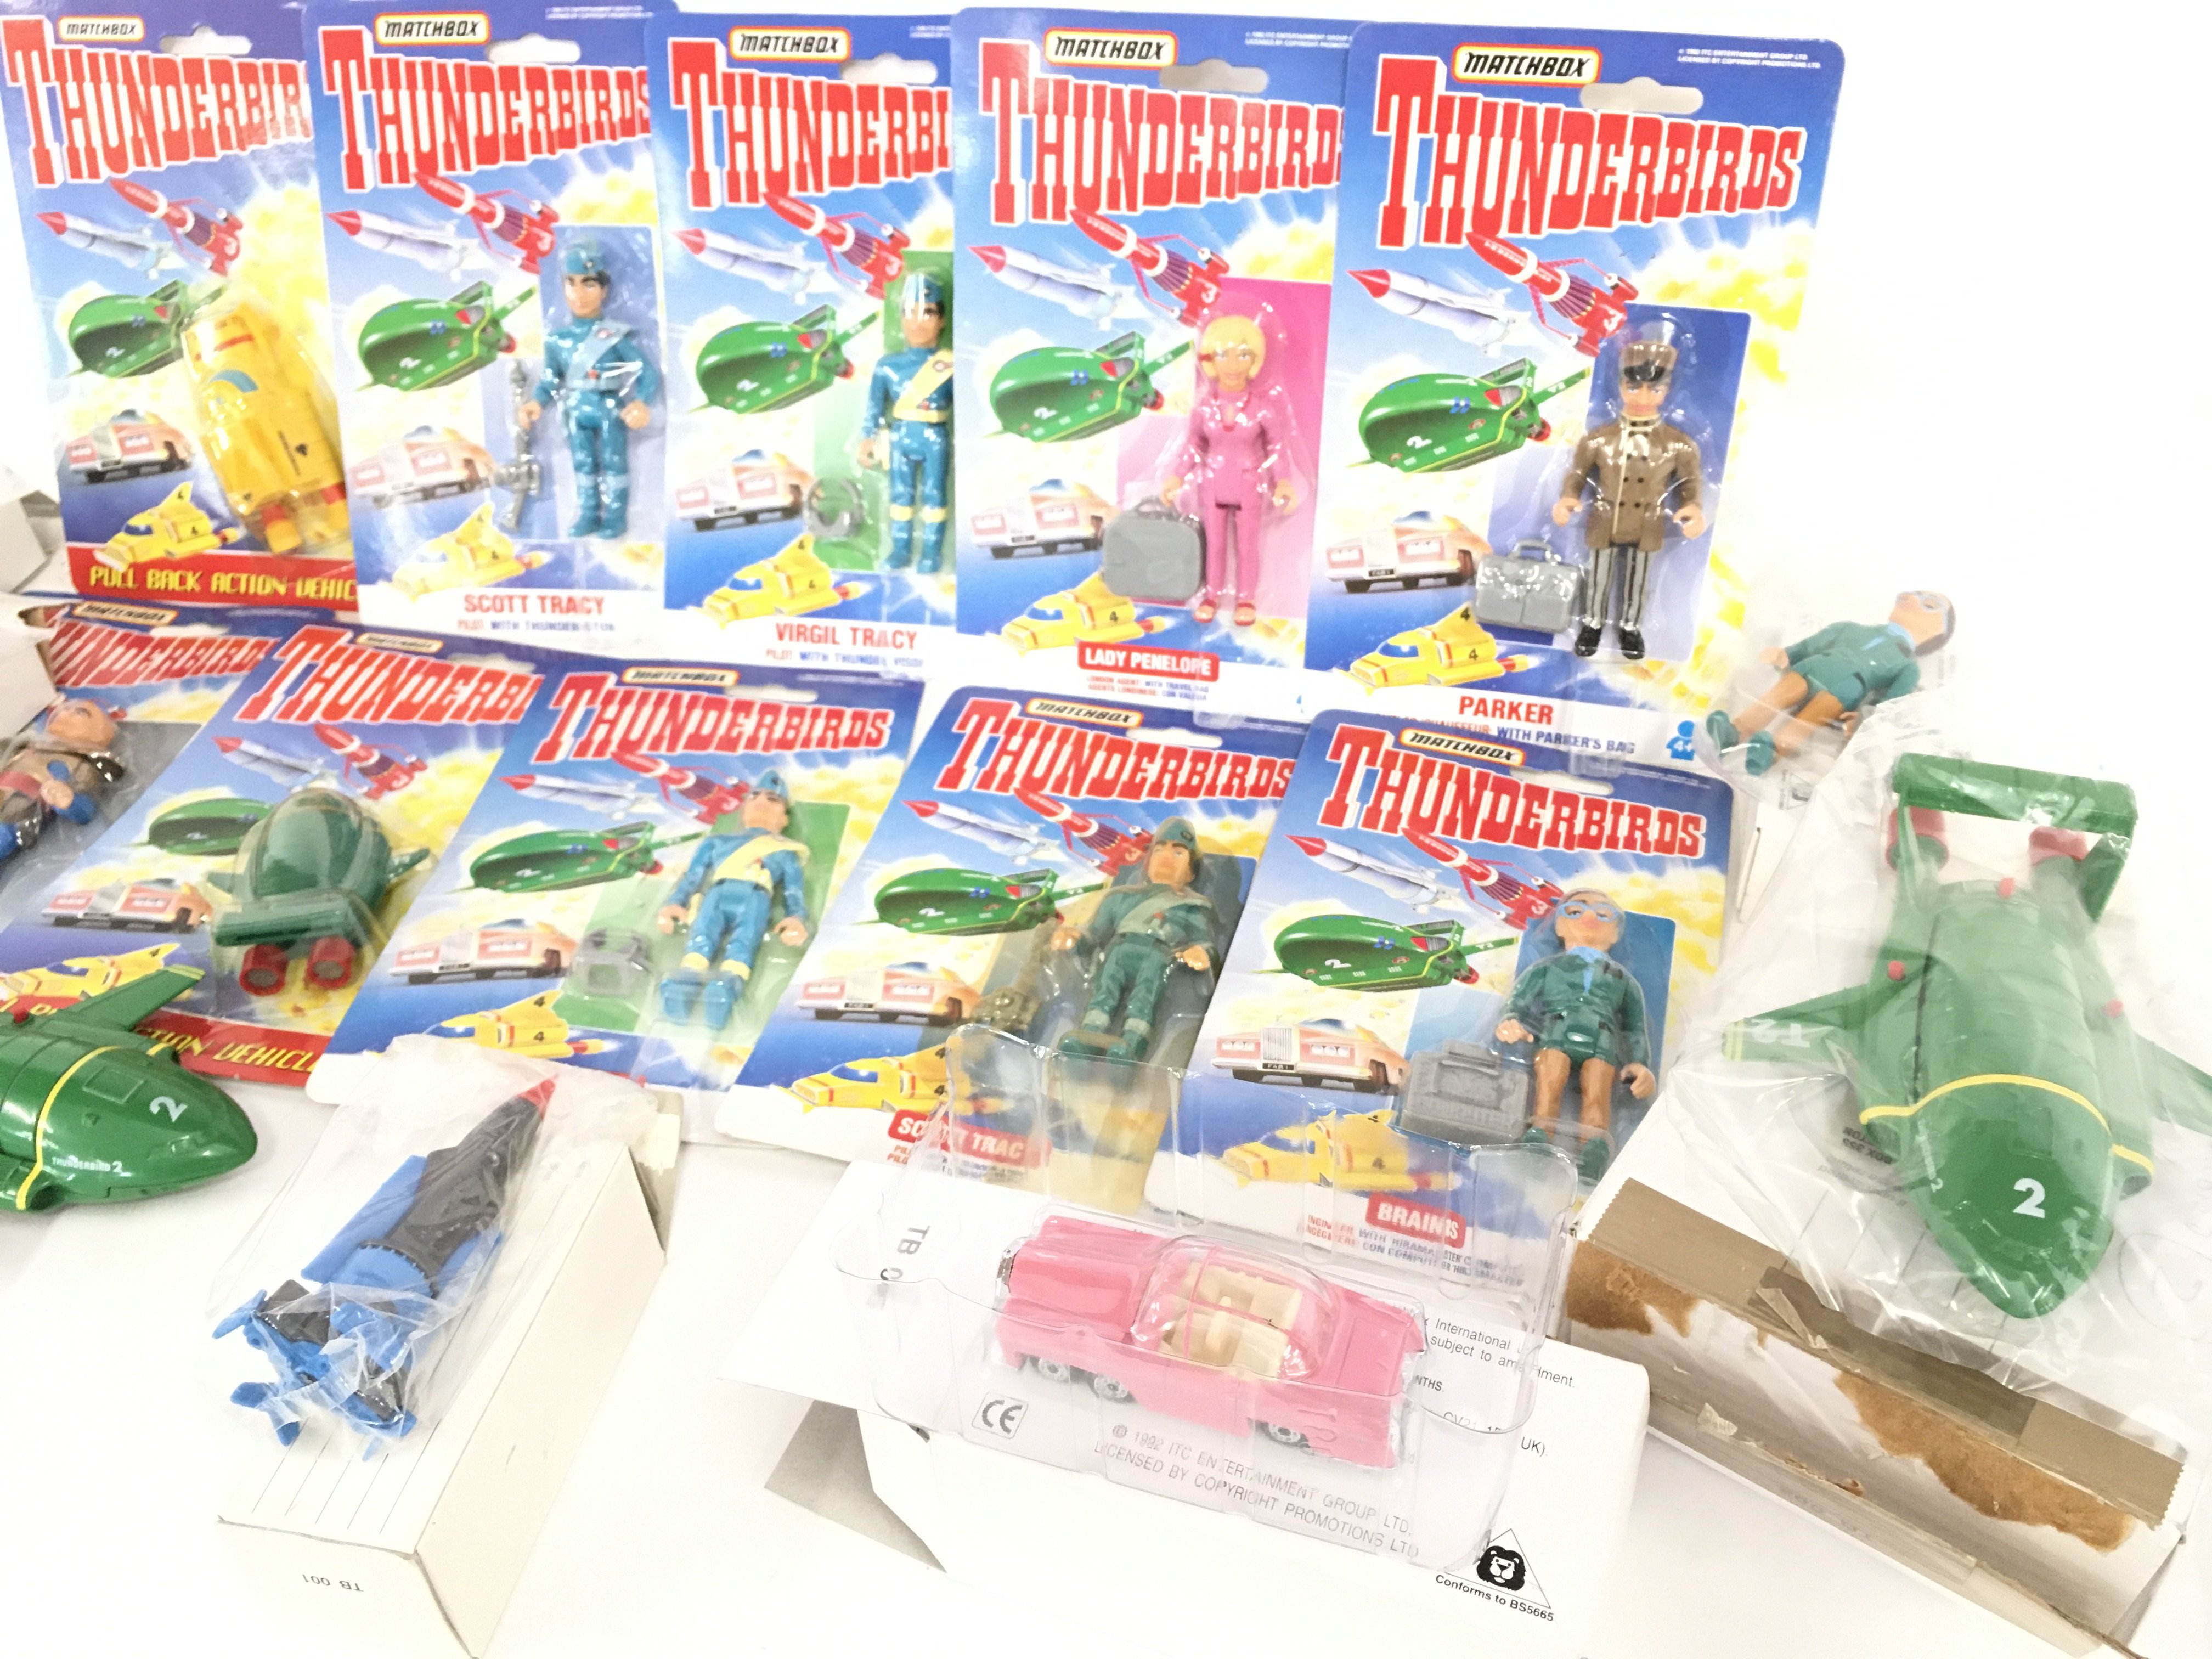 A Collection of Matchbox Thunderbirds Figures and - Image 3 of 3